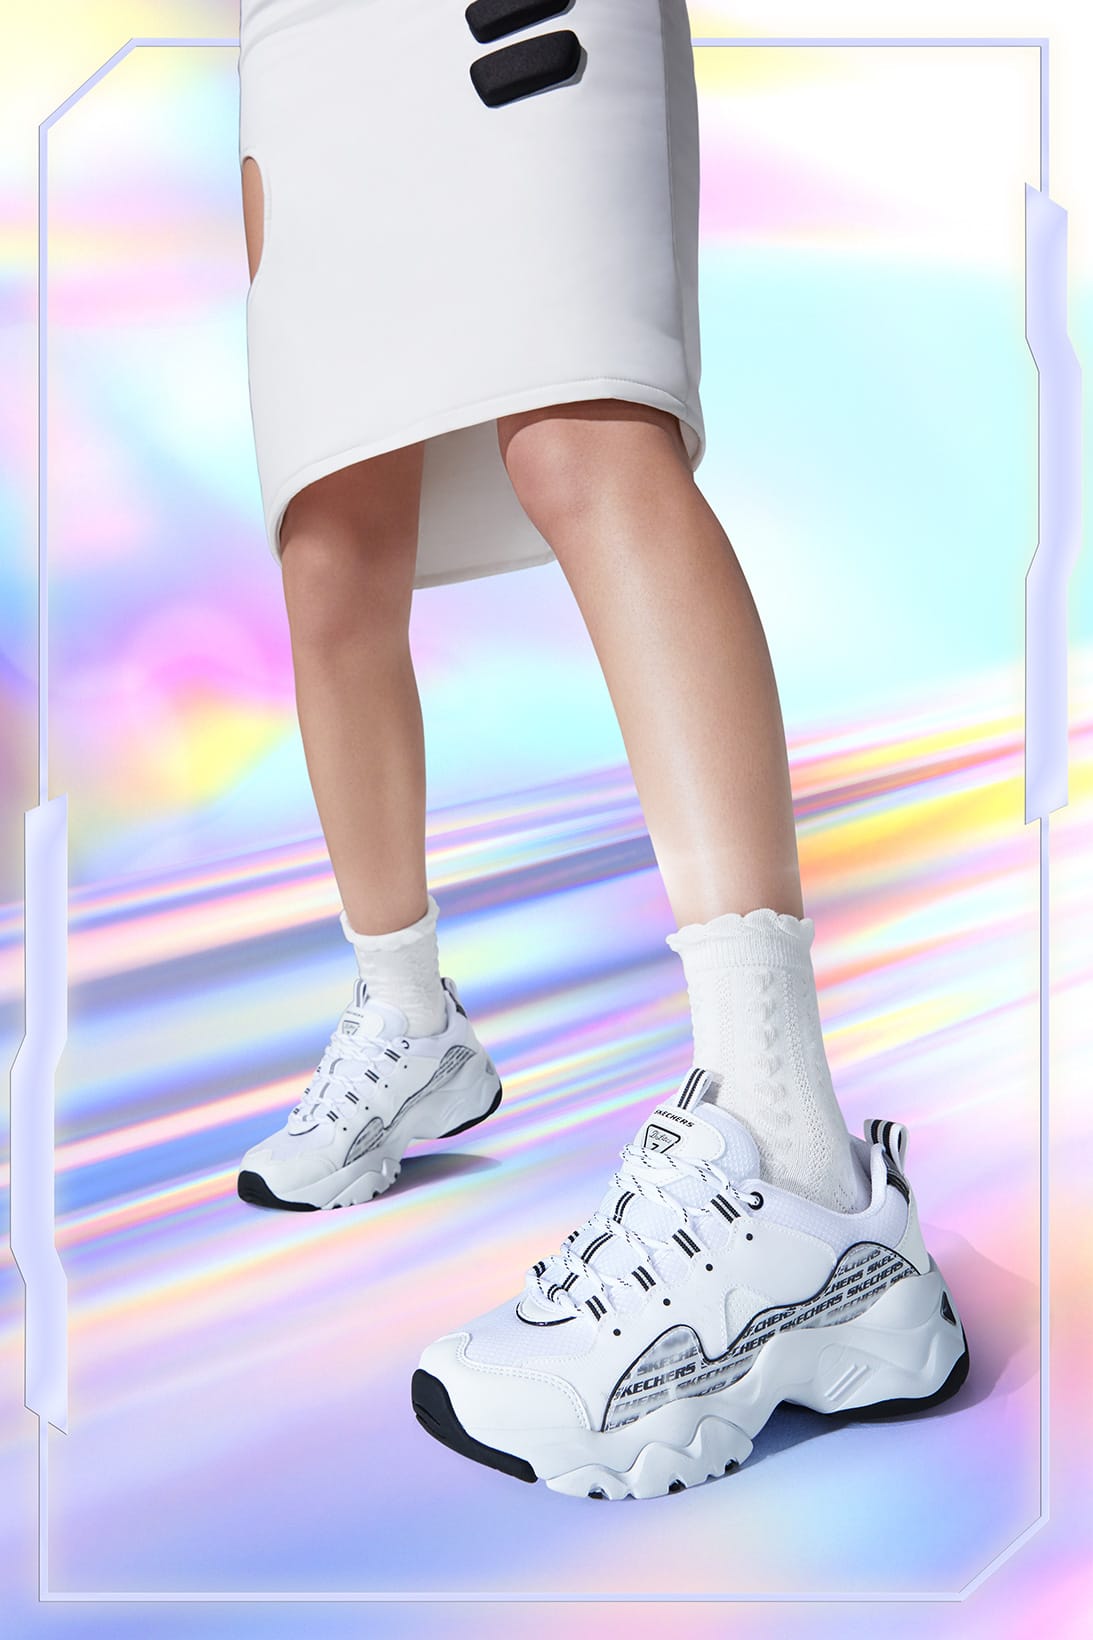 skechers holographic shoes